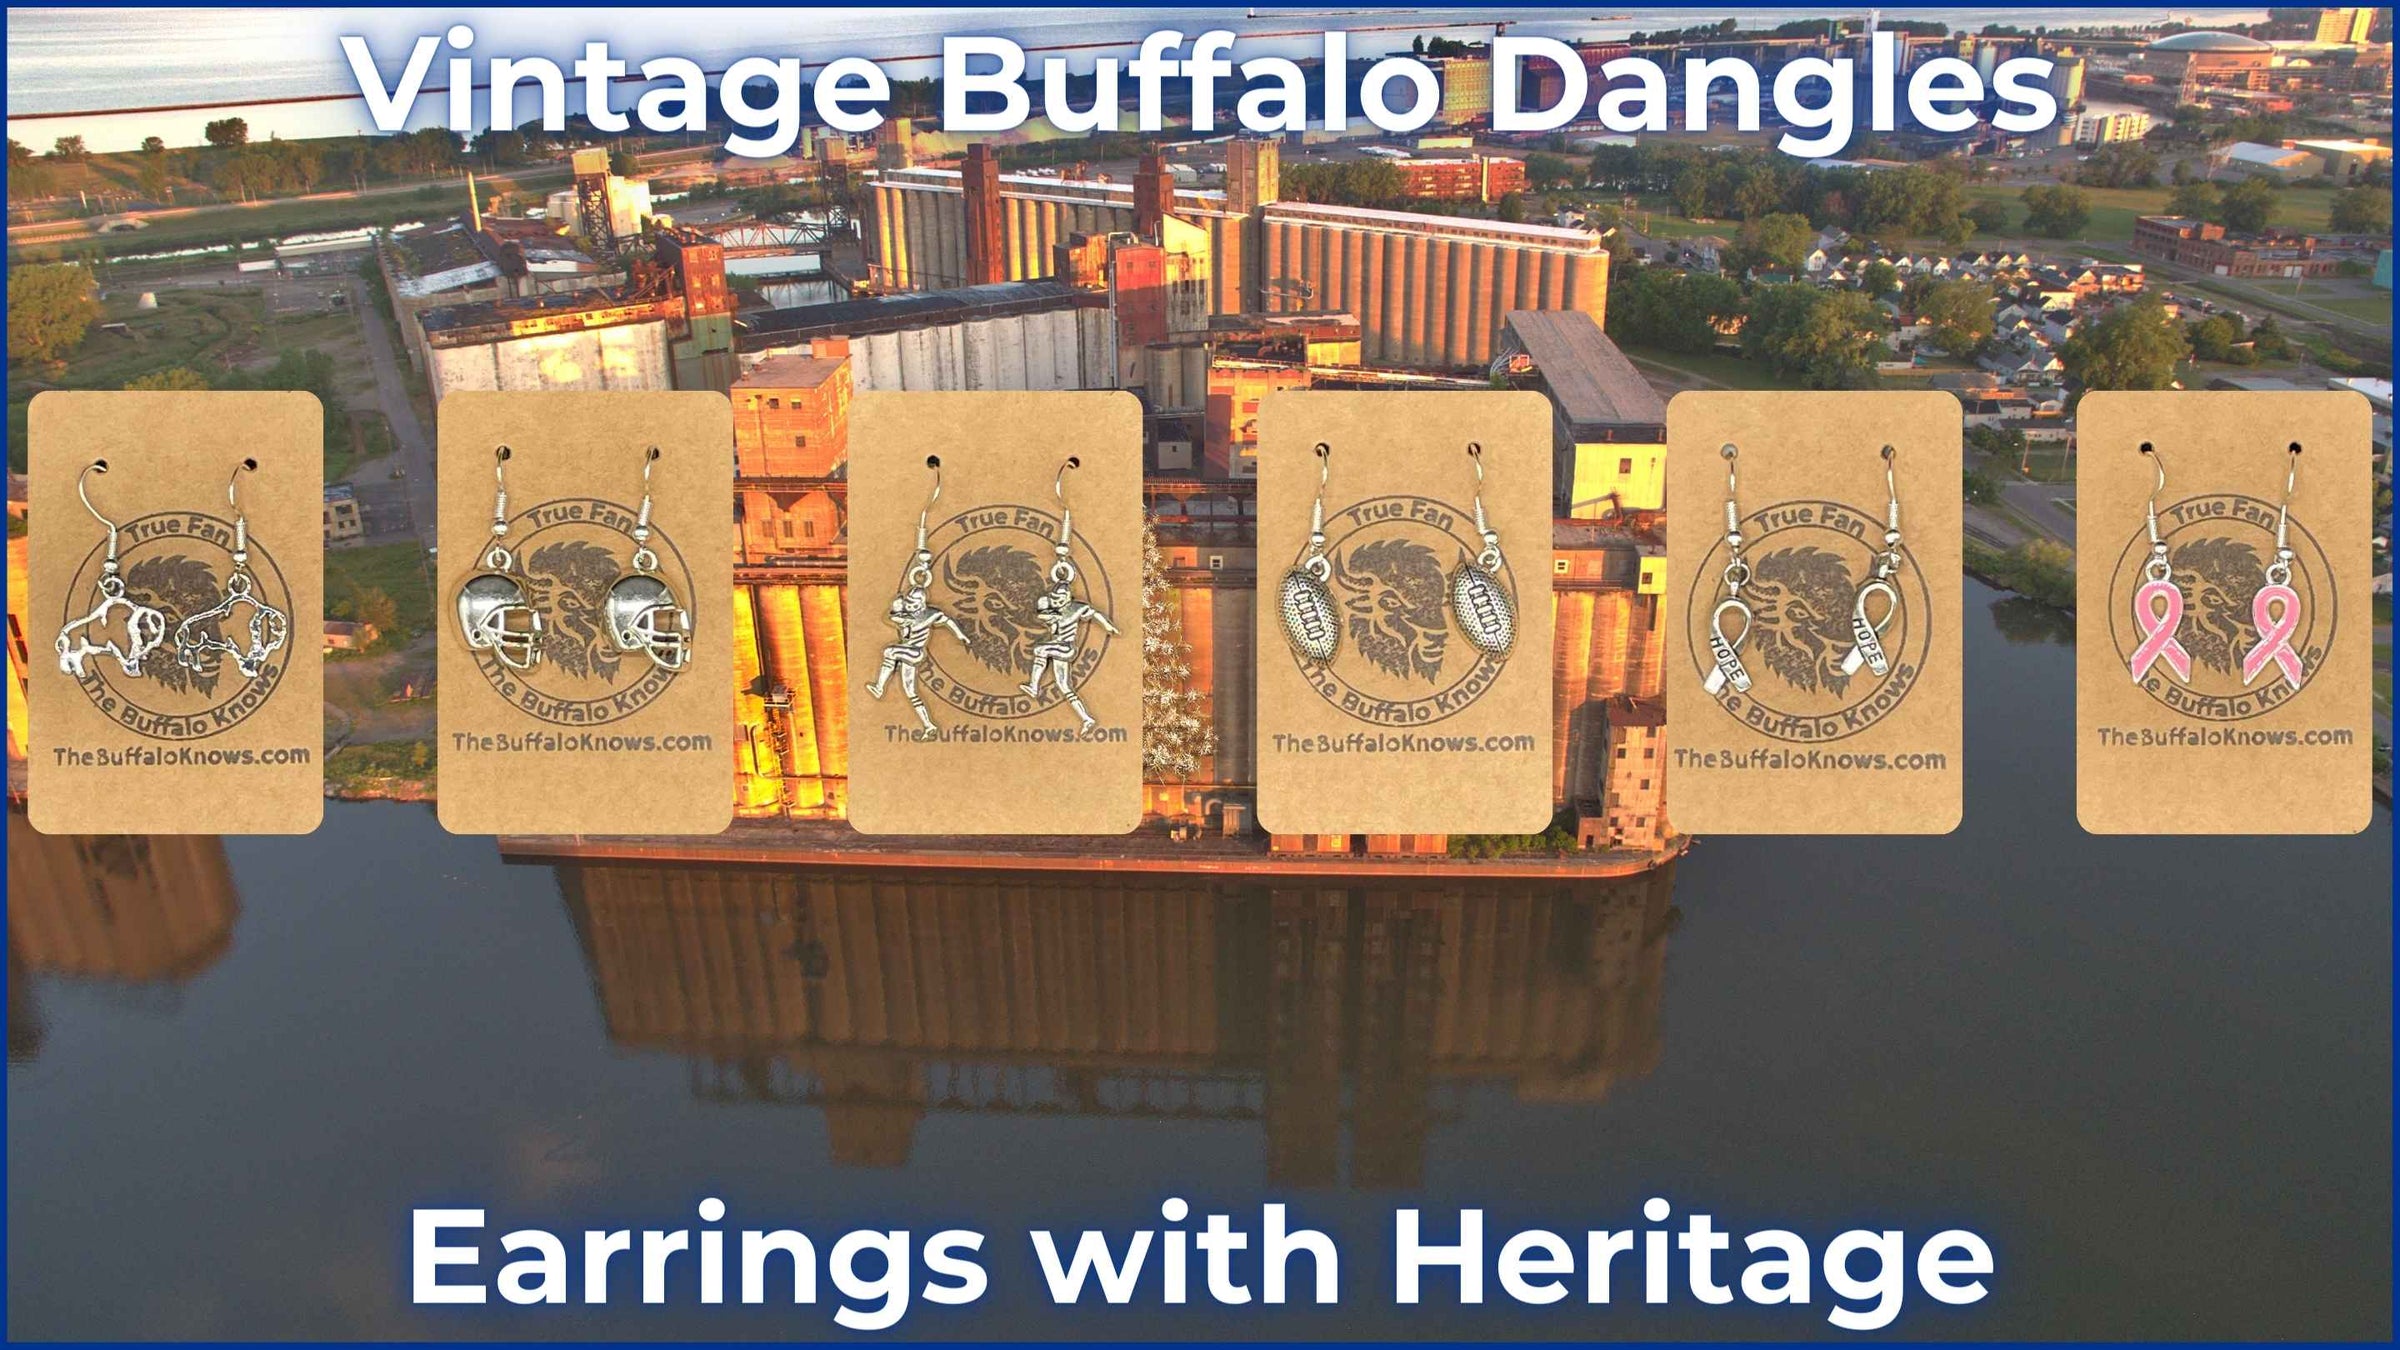 Collection of Buffalo Bills Earrings, featuring vintage-inspired designs, showcased against the Buffalo city backdrop. From classic buffalo silhouettes to spirited football charms, these earrings are unique Buffalo Bills gifts that blend tradition with fan pride.